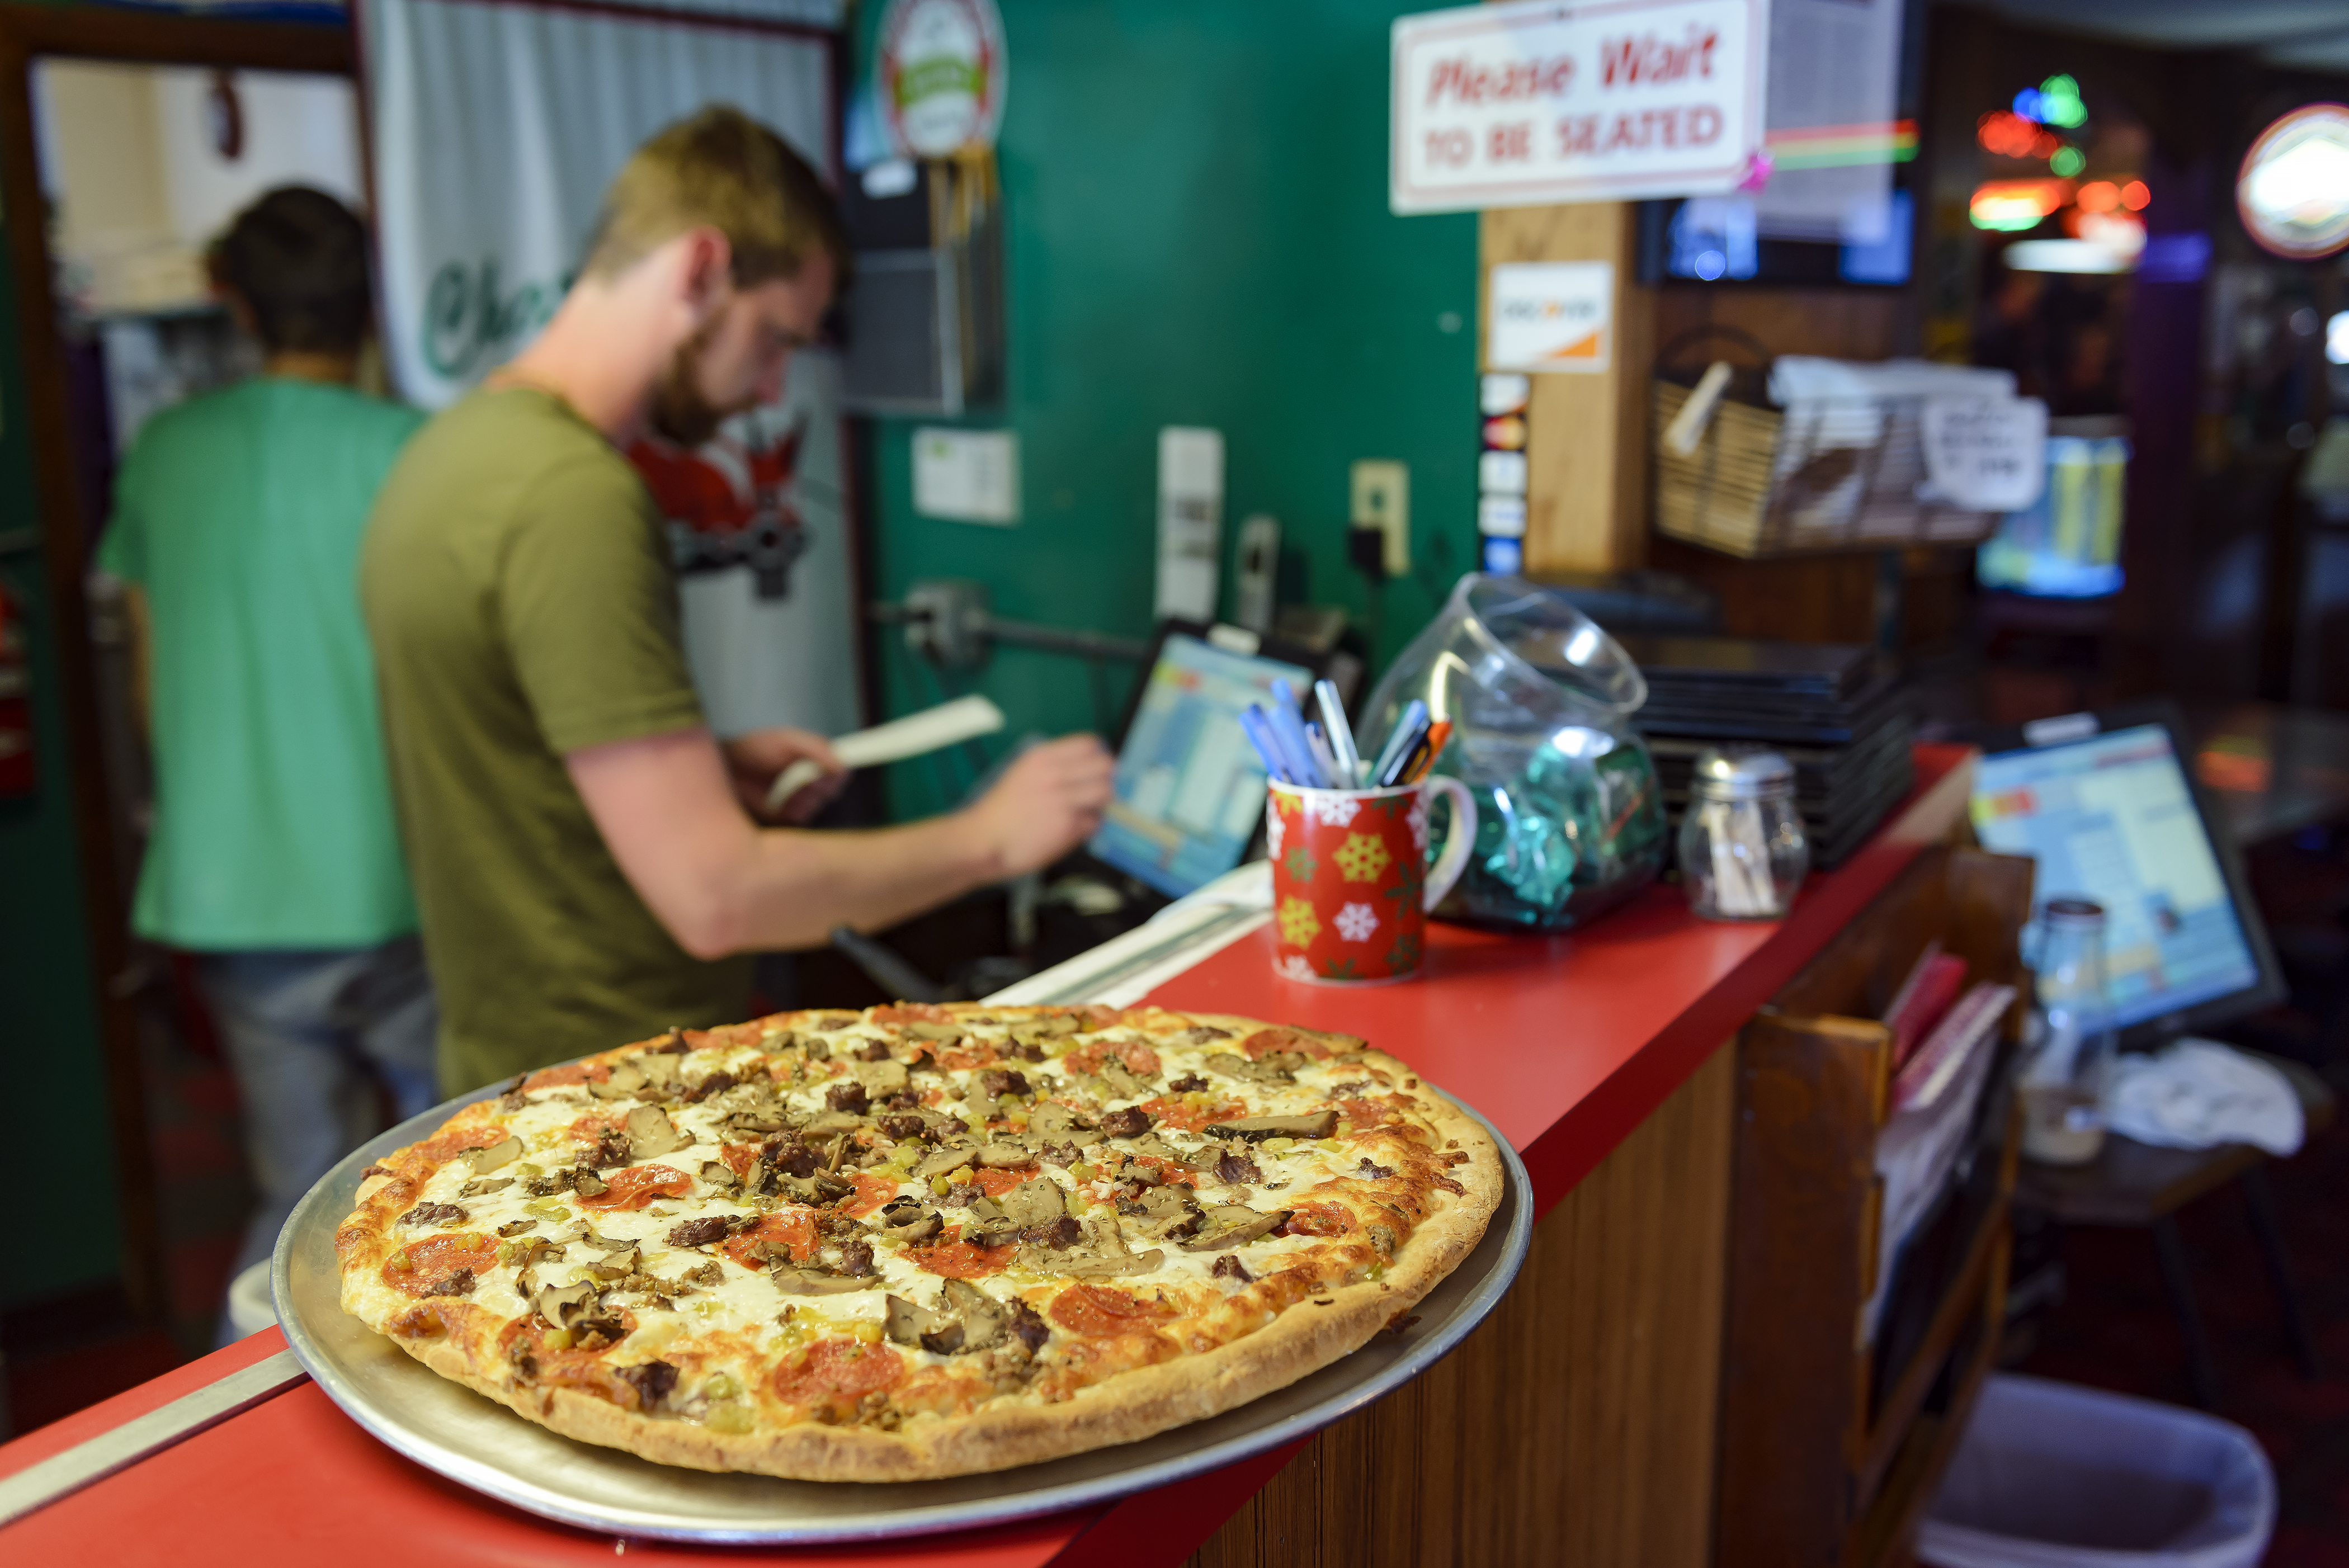 A pizza is ready to go at Charlie's Pizza in Yankton, South Dakota.